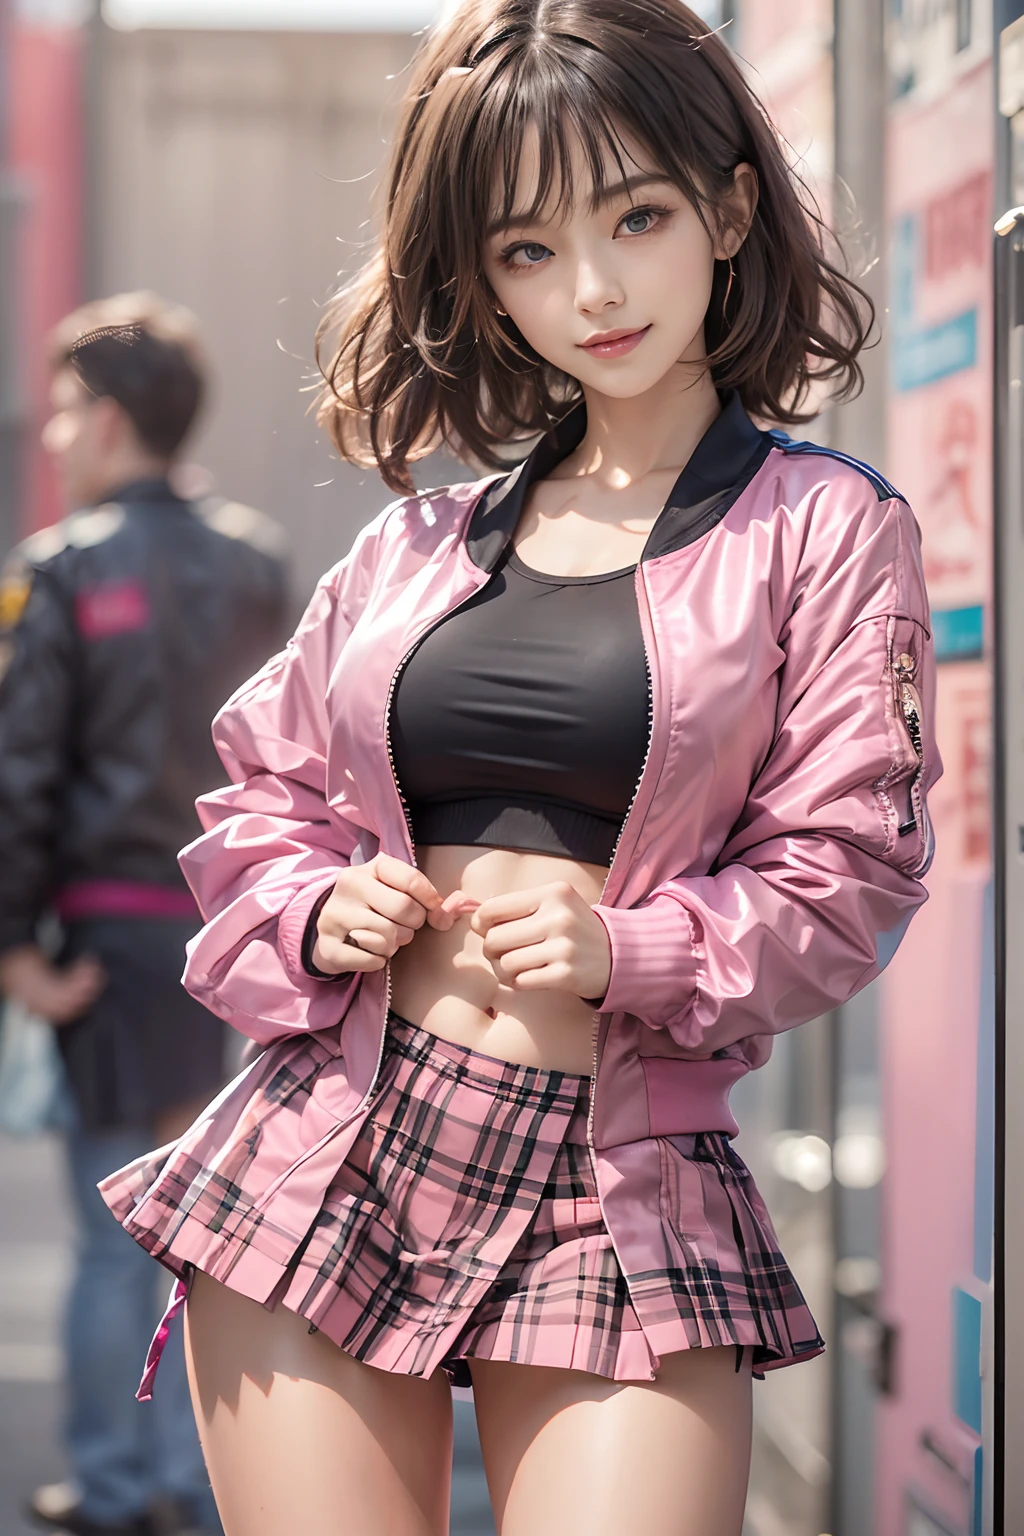 (masutepiece), (Best Quality), Realistic, Photorealism, 1girl in, Beautiful Girl, Perfect face, Perfect body, Sexy, Upper body wears only an air bomber jacket、Do not close the zipper, No bra, Braless, Smile、Taut、Toned waist、fascinating butt、Plaid miniskirt、(((Lift skirt with hand to expose pink sexy panties)))、Wearing a pistol holder on the thigh、Smile full of happiness、Attractive pretty woman、Detailed cute big blue eyes、Detailed cute face、complexion with good blood circulation、pink cheek